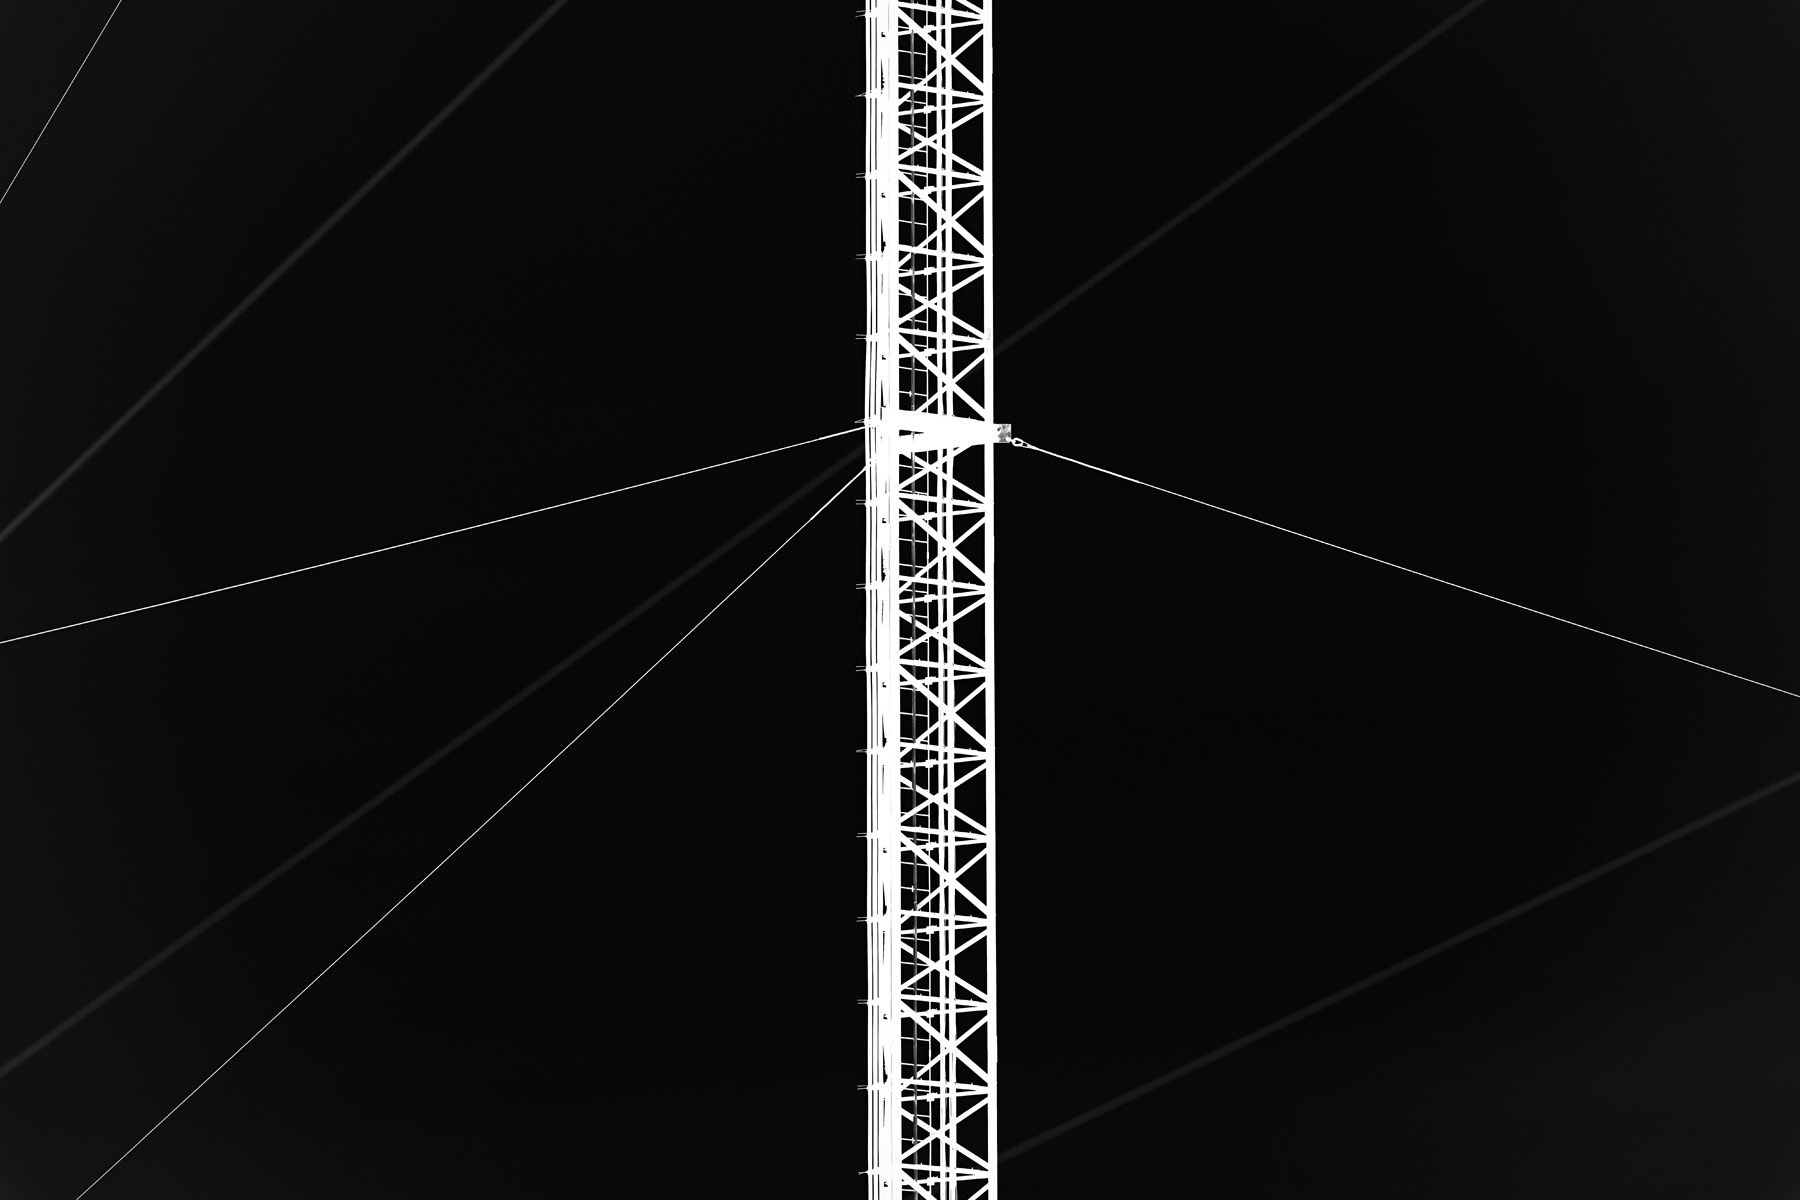 Scratchboard style abstraction of a communication tower